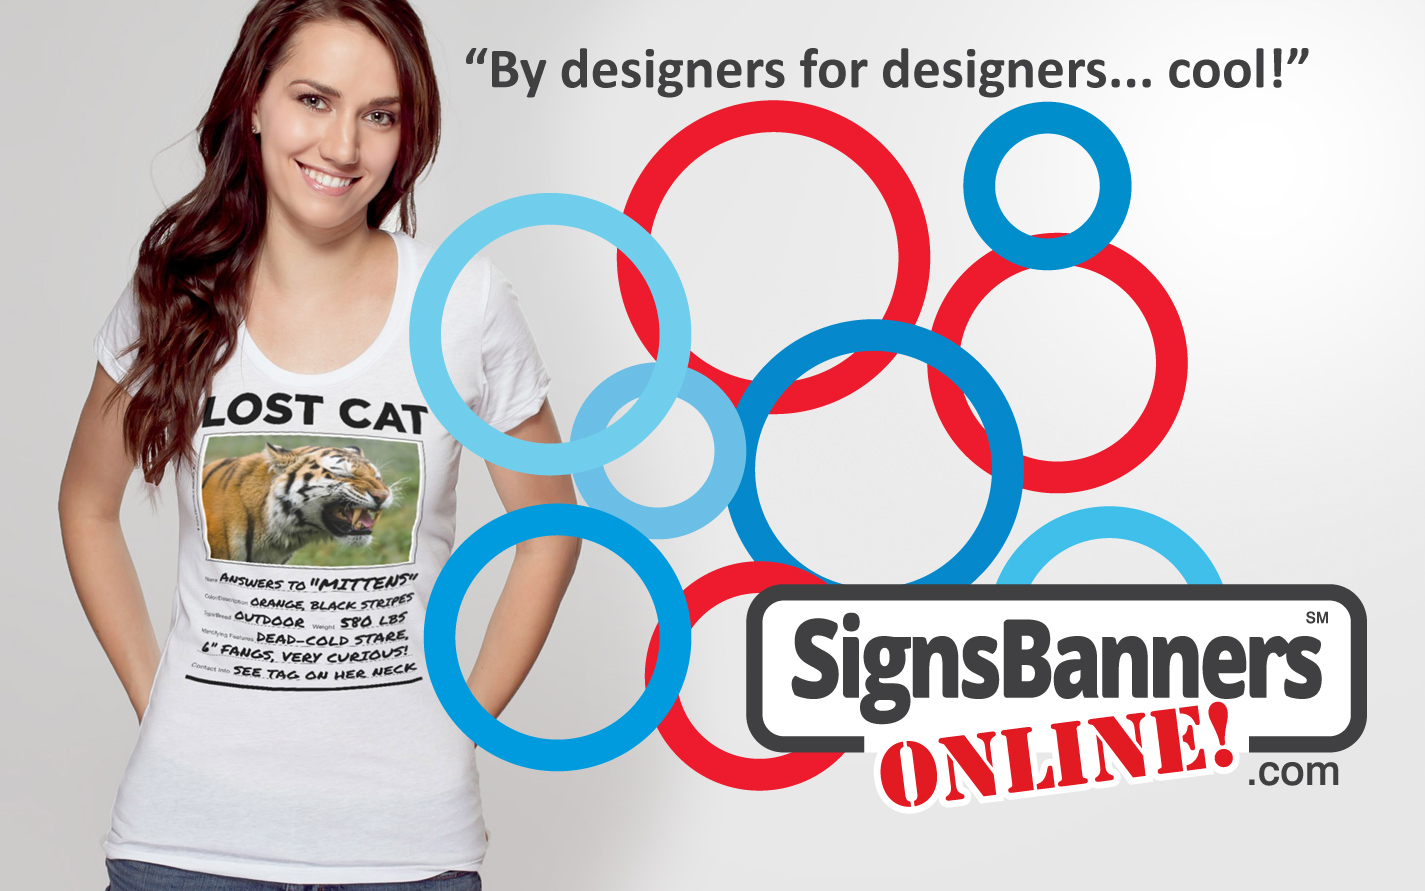 Signs Banners Online by designers for designers... cool!